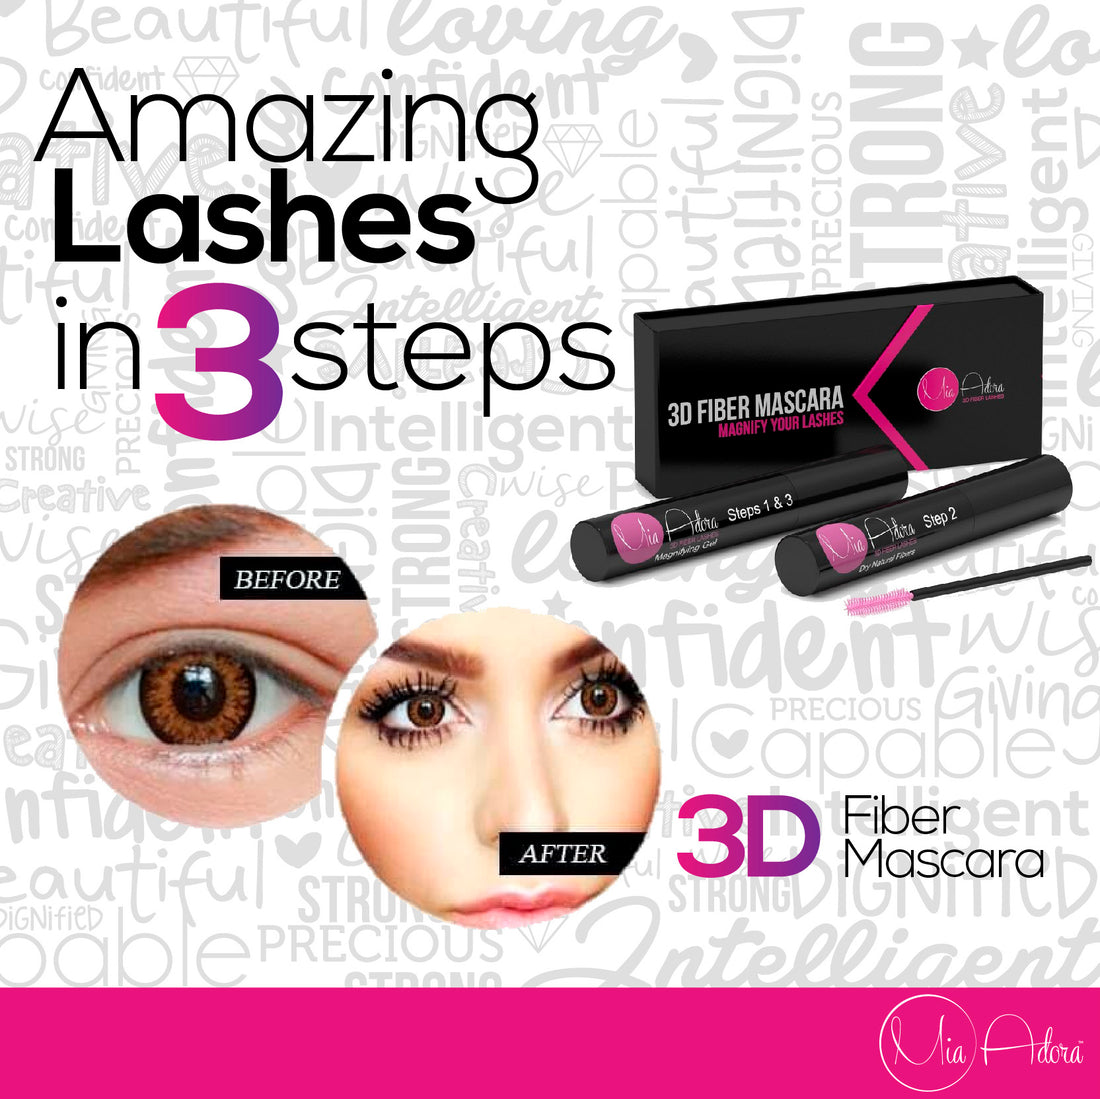 Mia Adora’s 3D Fiber Lash Mascara has been crowned as the best mascara on Amazon. Try out this dry fiber mascara and avail of the free shipping offered to all US address.